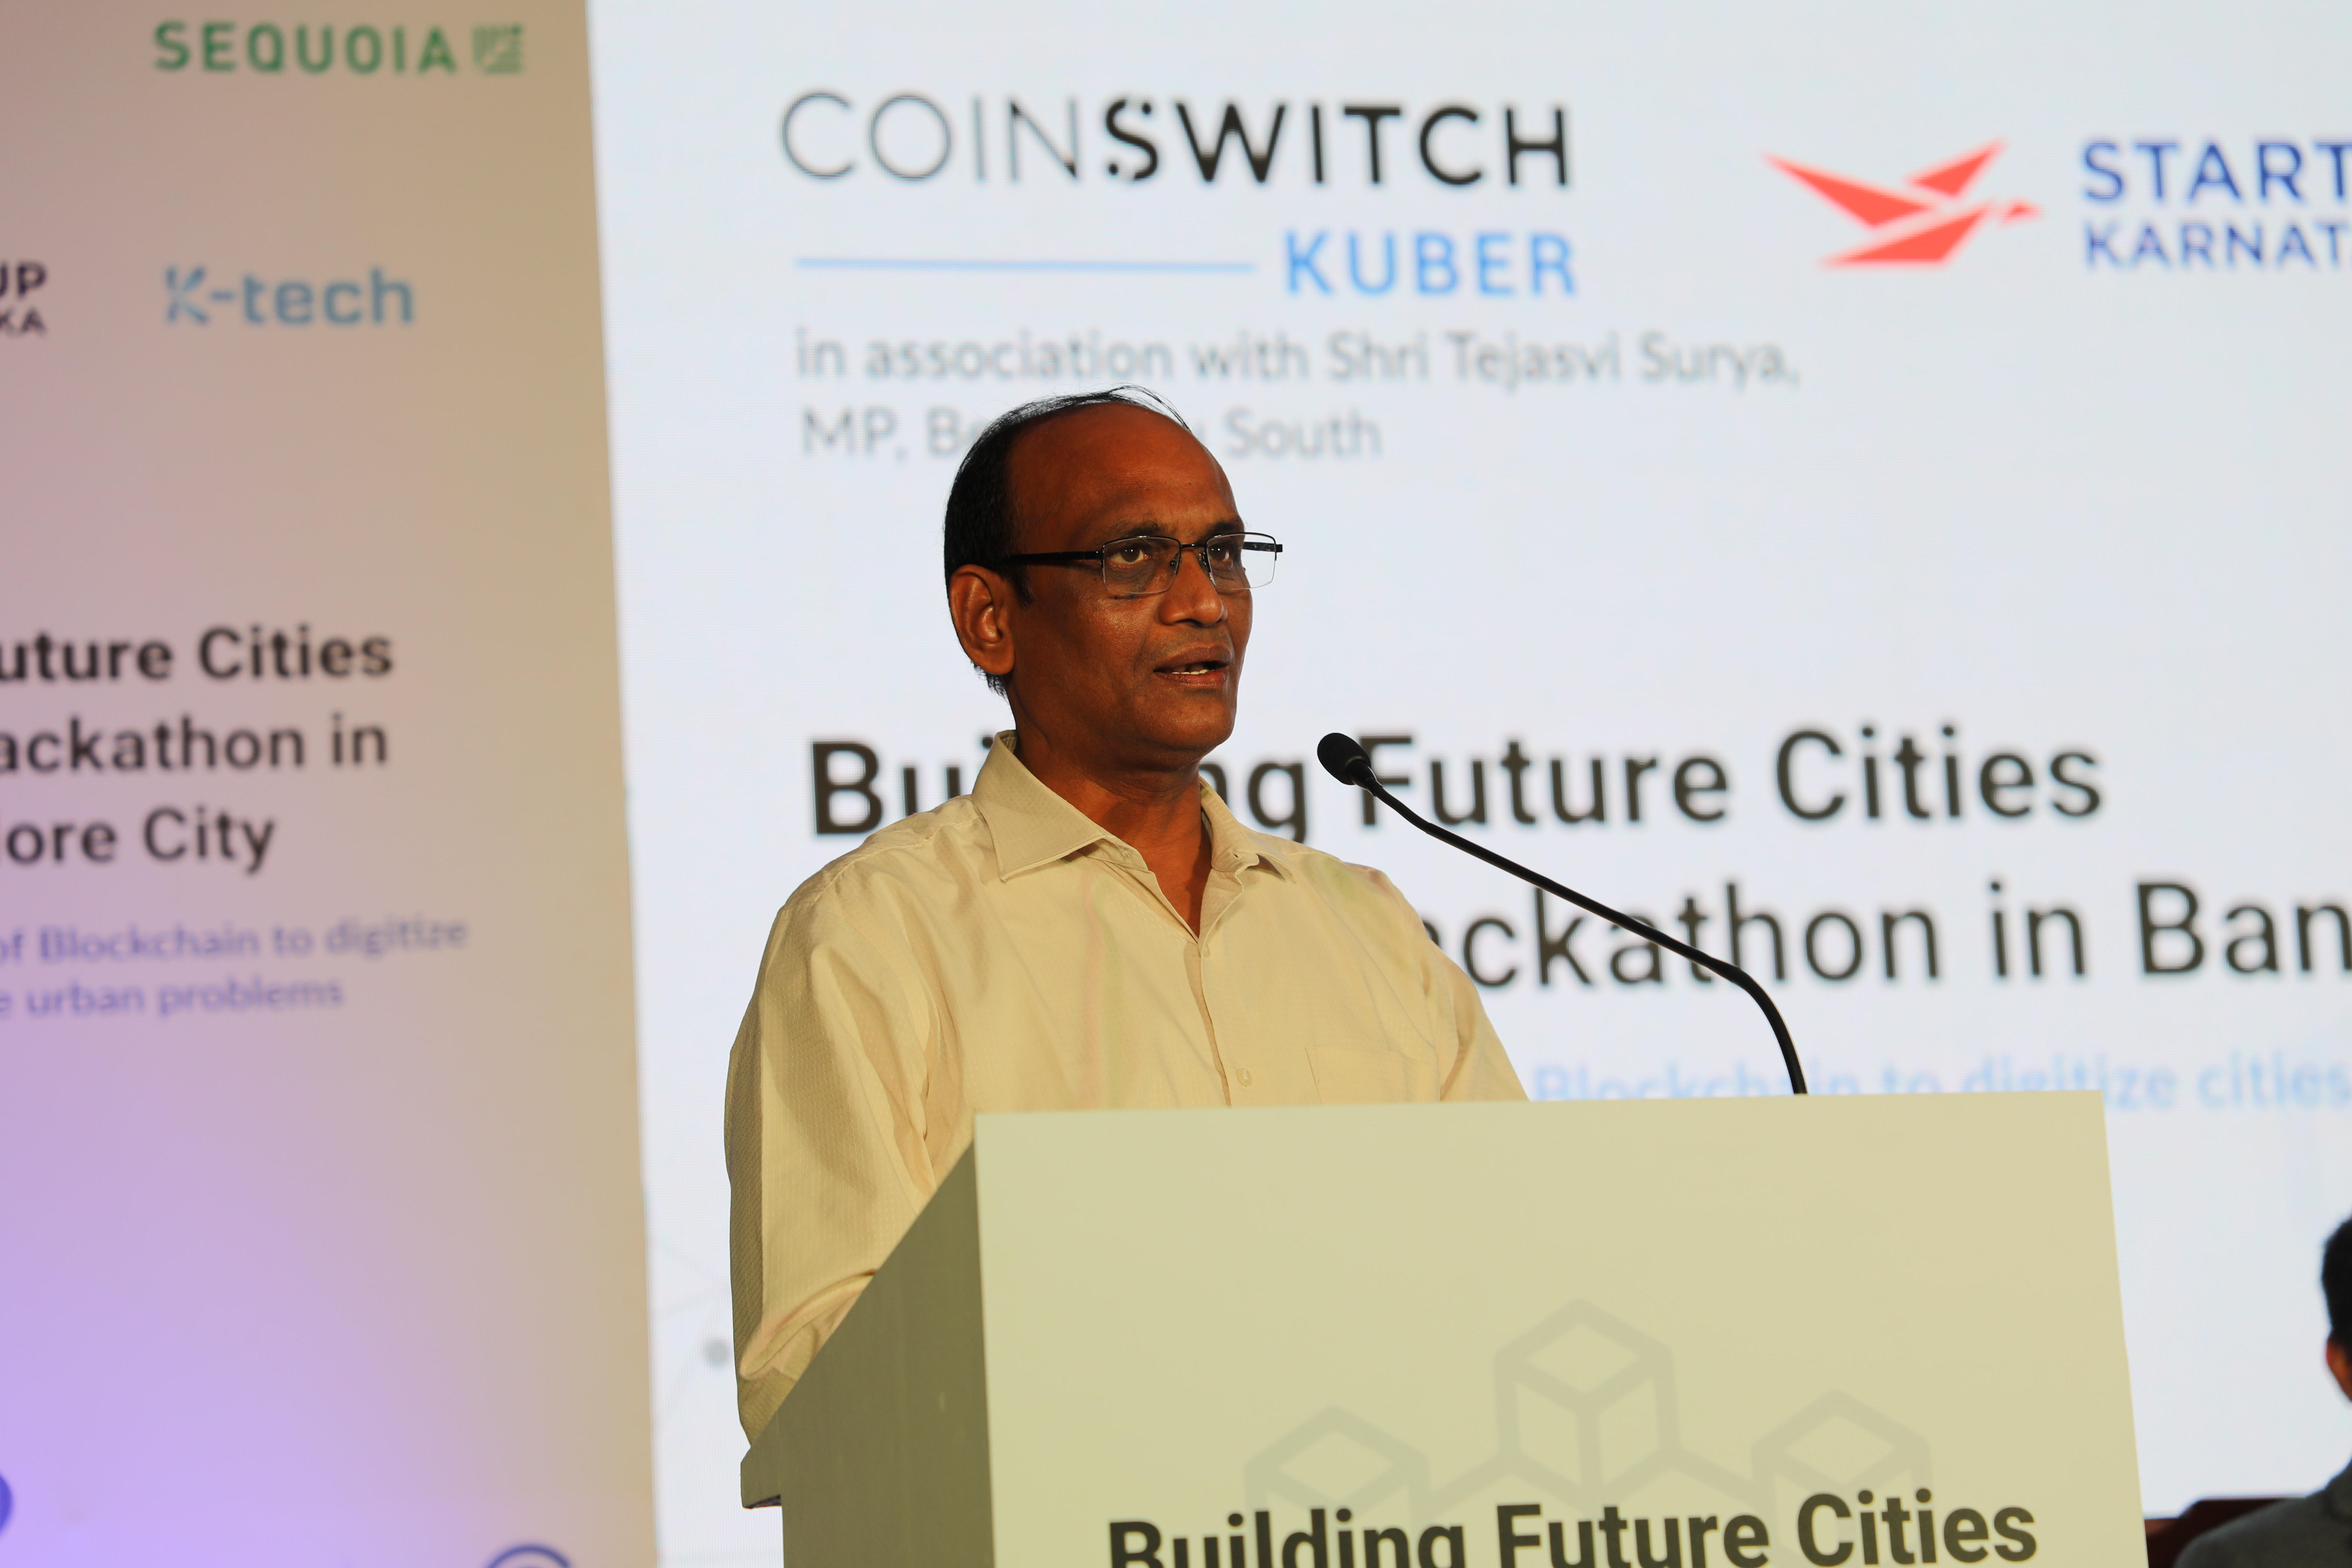 Hackathon by Startup Karnataka and CoinSwitch to find the best blockchain builders to solve urban challenges